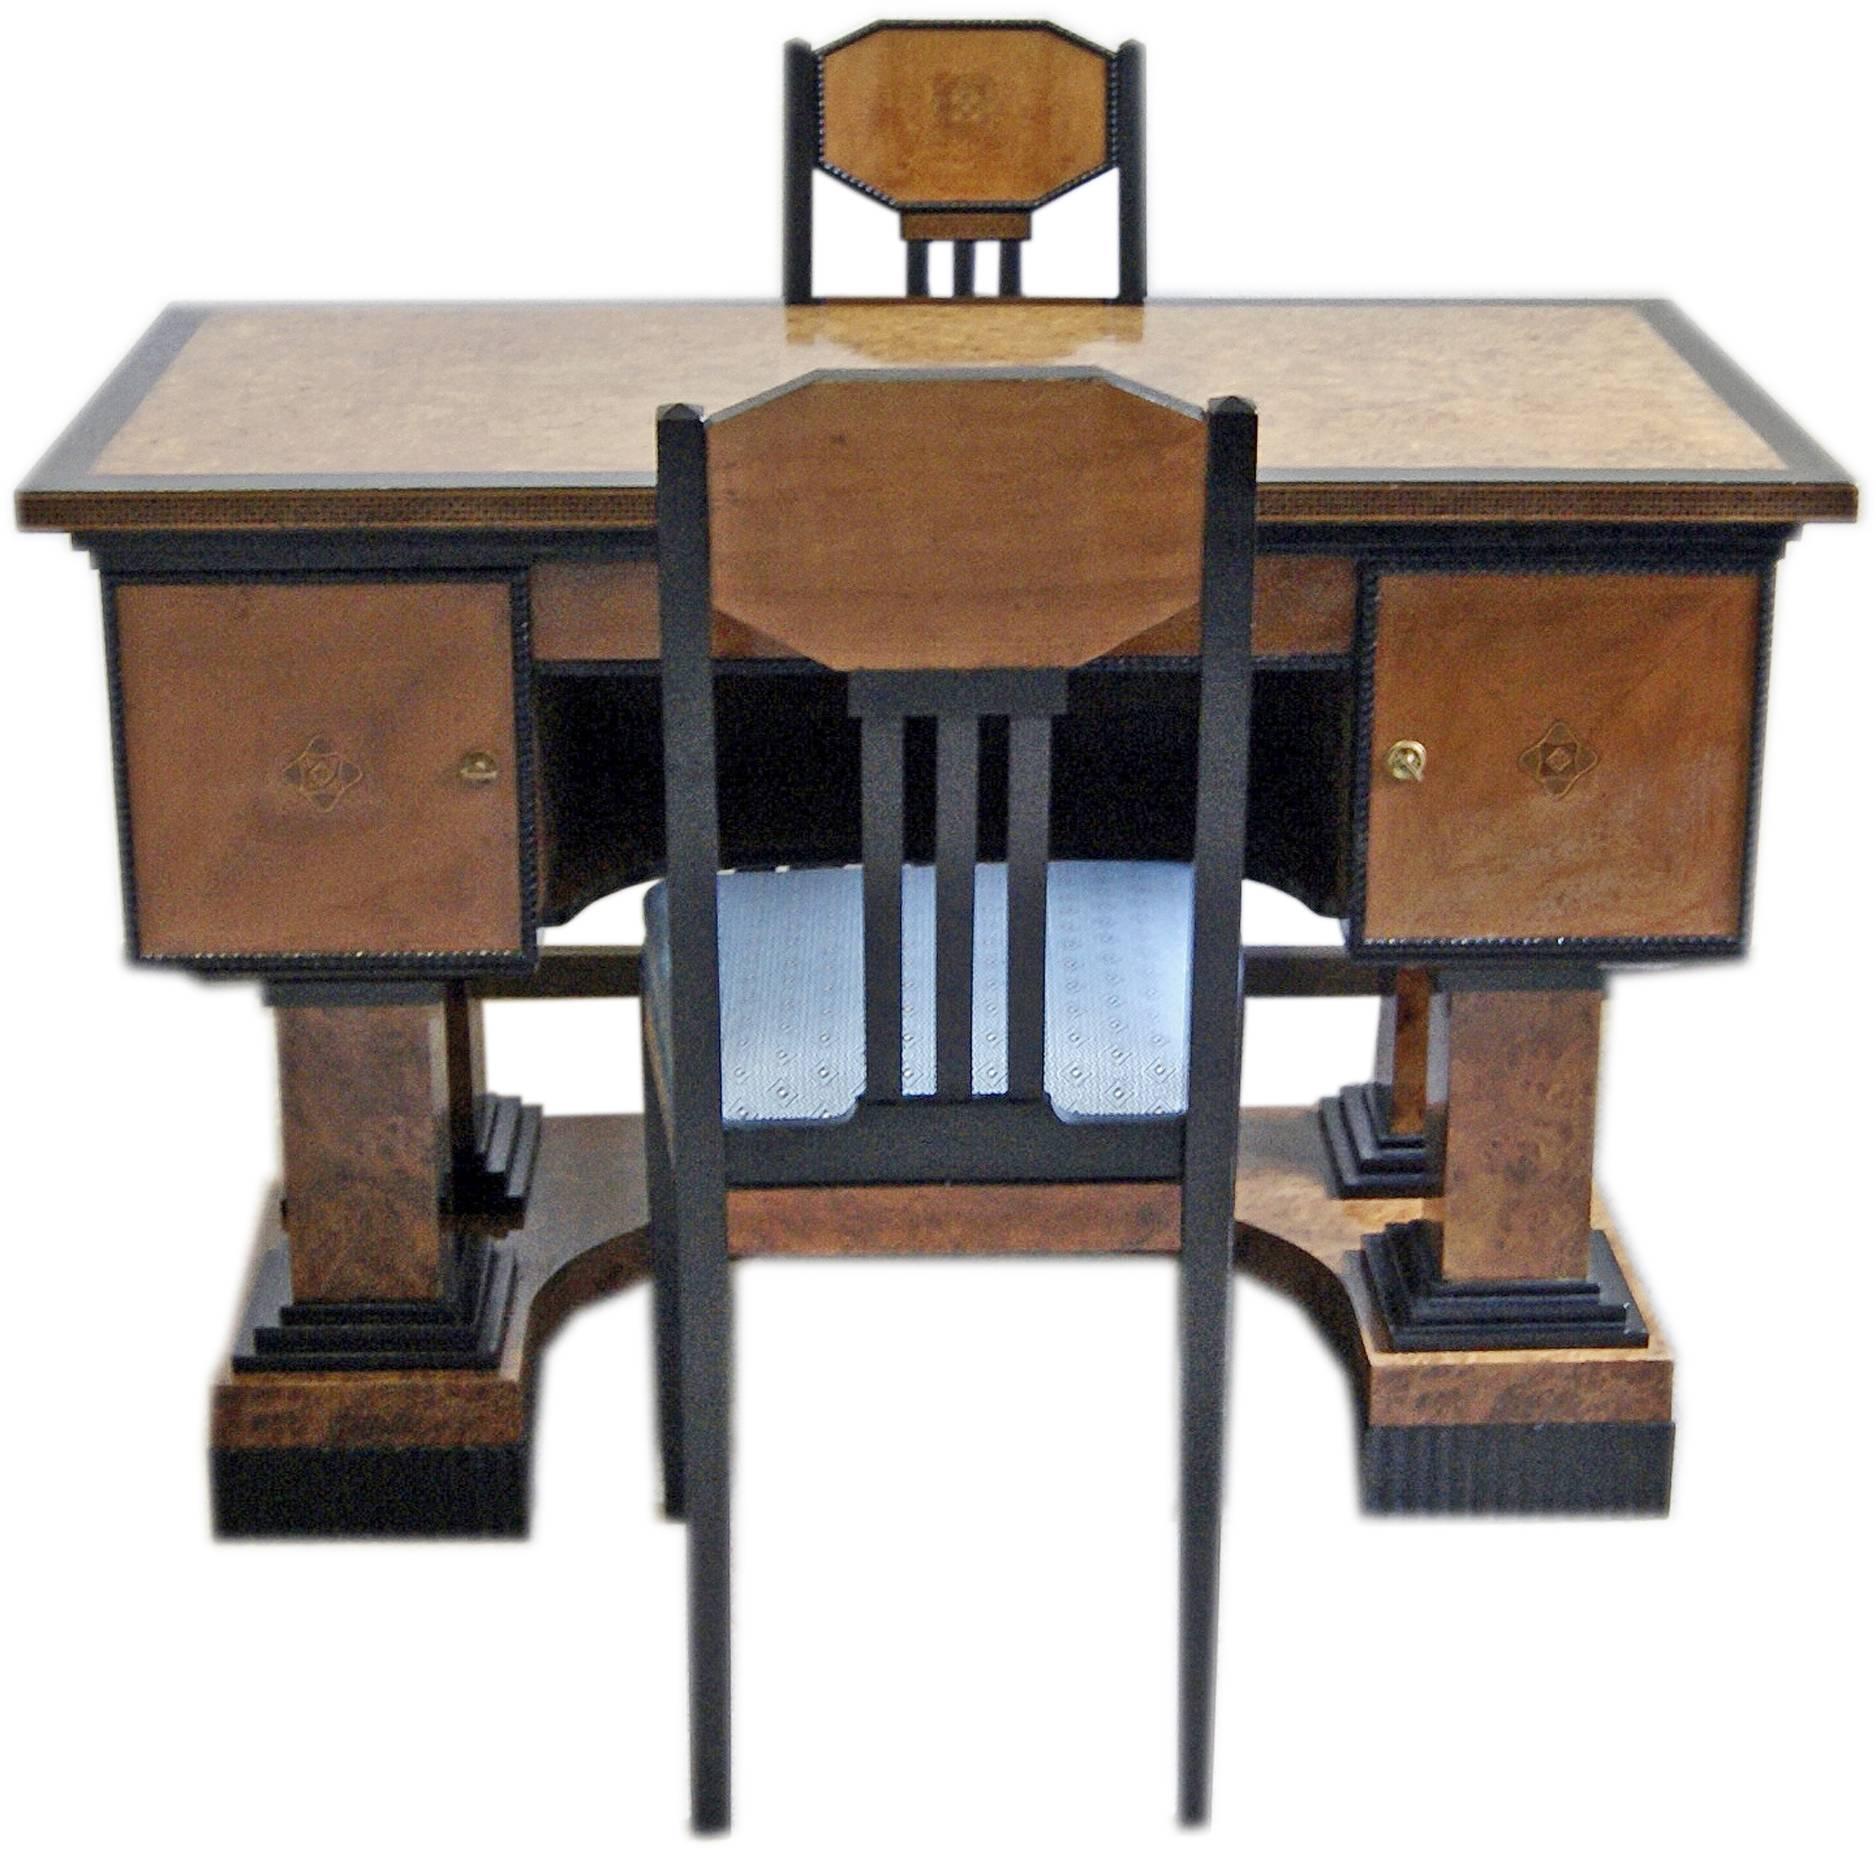 Gorgeous Art Nouveau music room writing desk with two chairs of finest manufacturing quality, 1900-1905.

Designer:
Attributed to circle of Josef Maria Olbrich (1867-1908).
Olbrich, the world-famous Austrian architect and co-founder of the